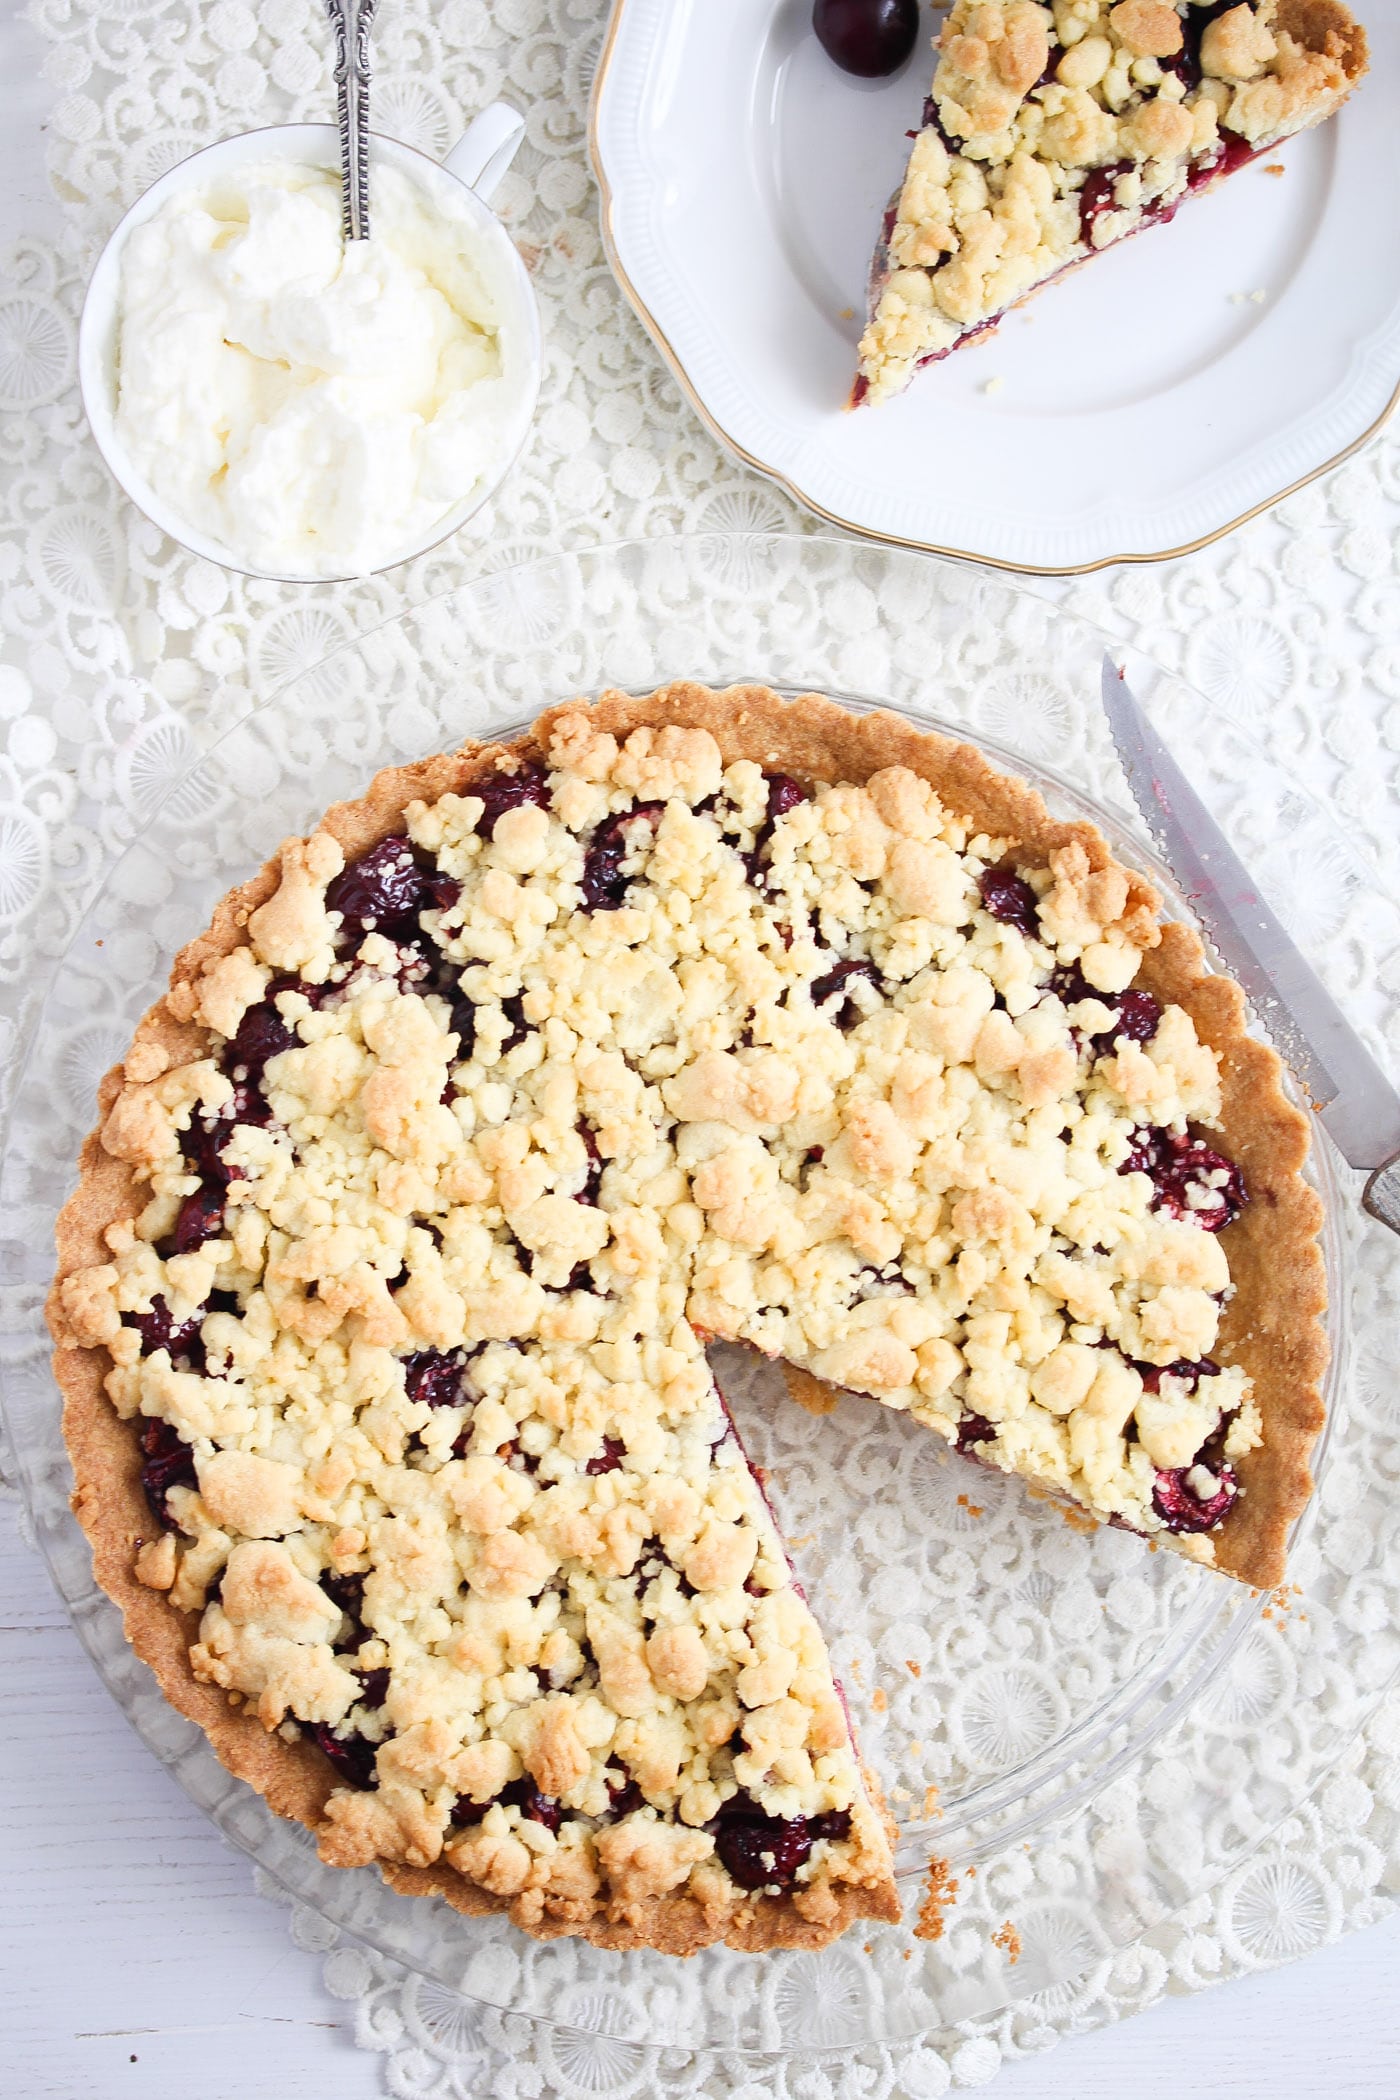 cherry tart with whipped cream on the side